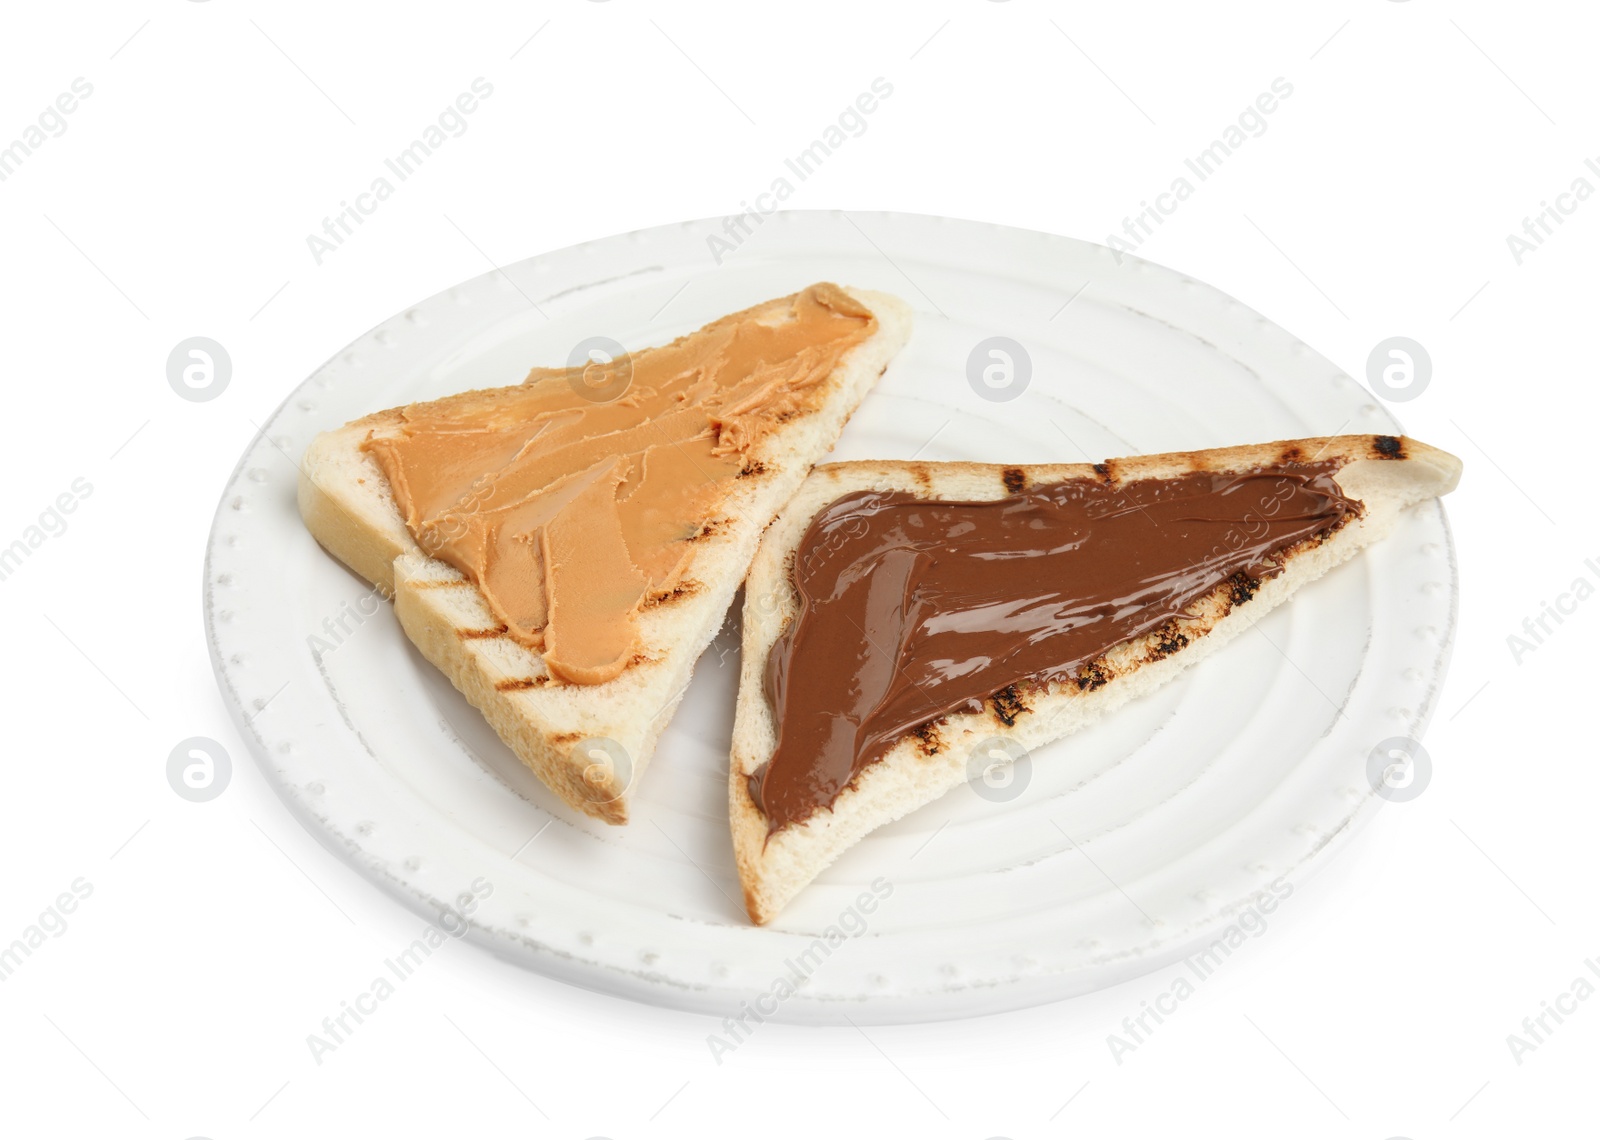 Photo of Slices of bread with different spreads on white background